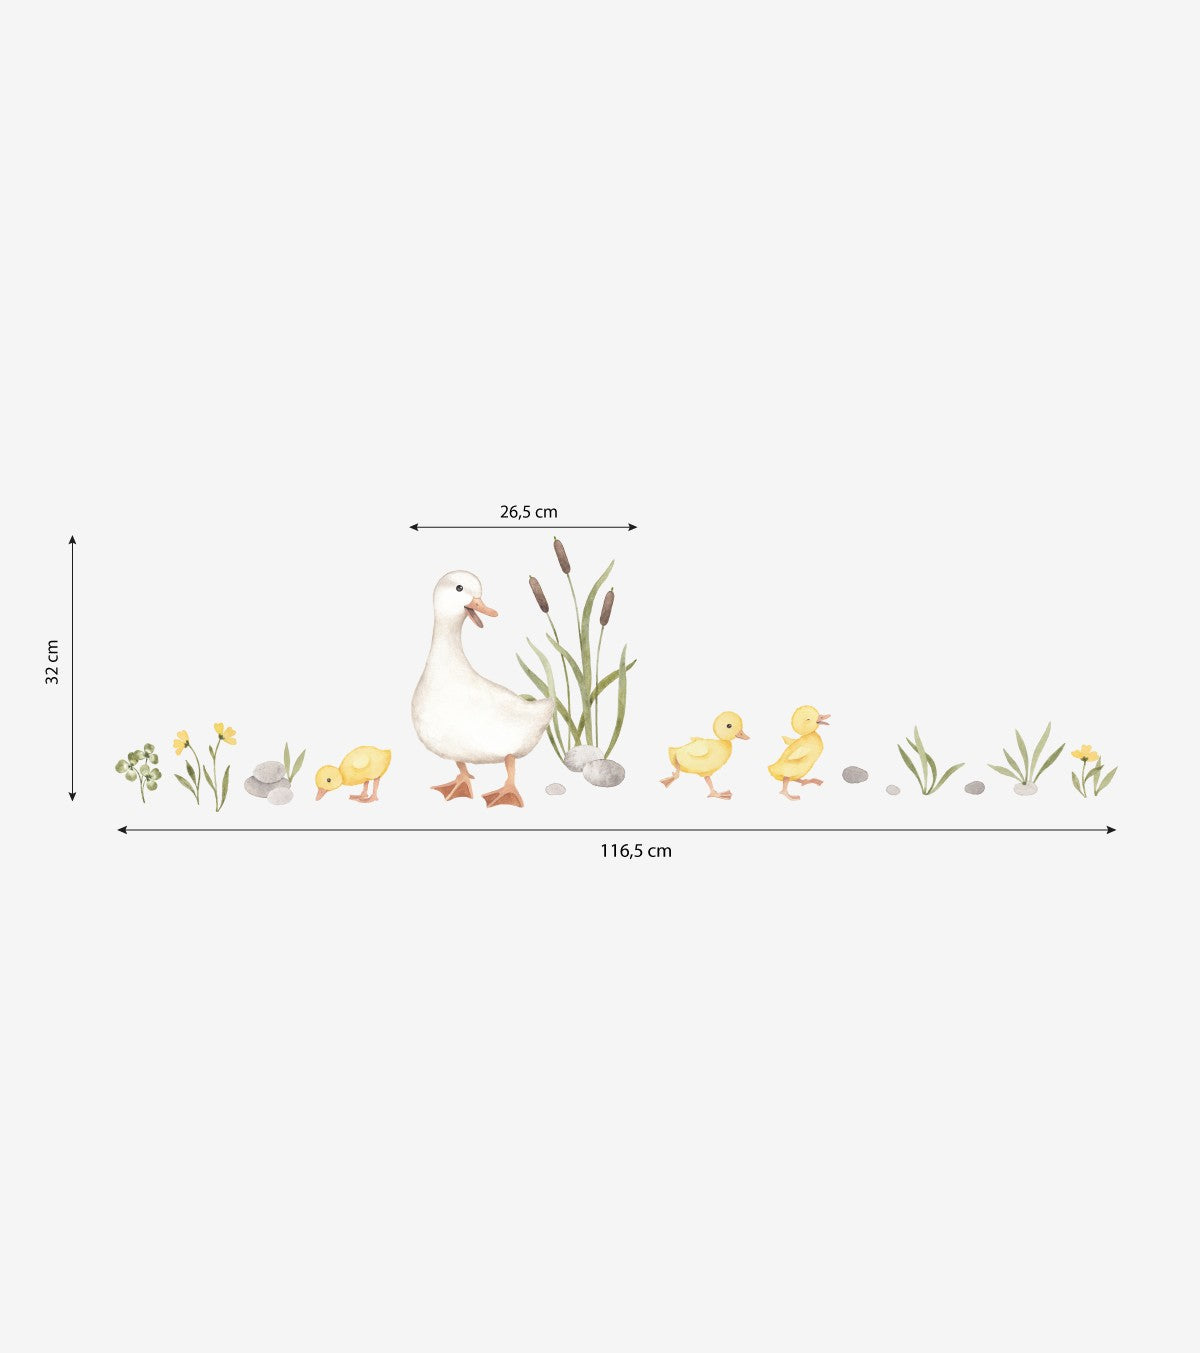 LUCKY DUCKY - Wall decals murals - Mama duck and ducklings